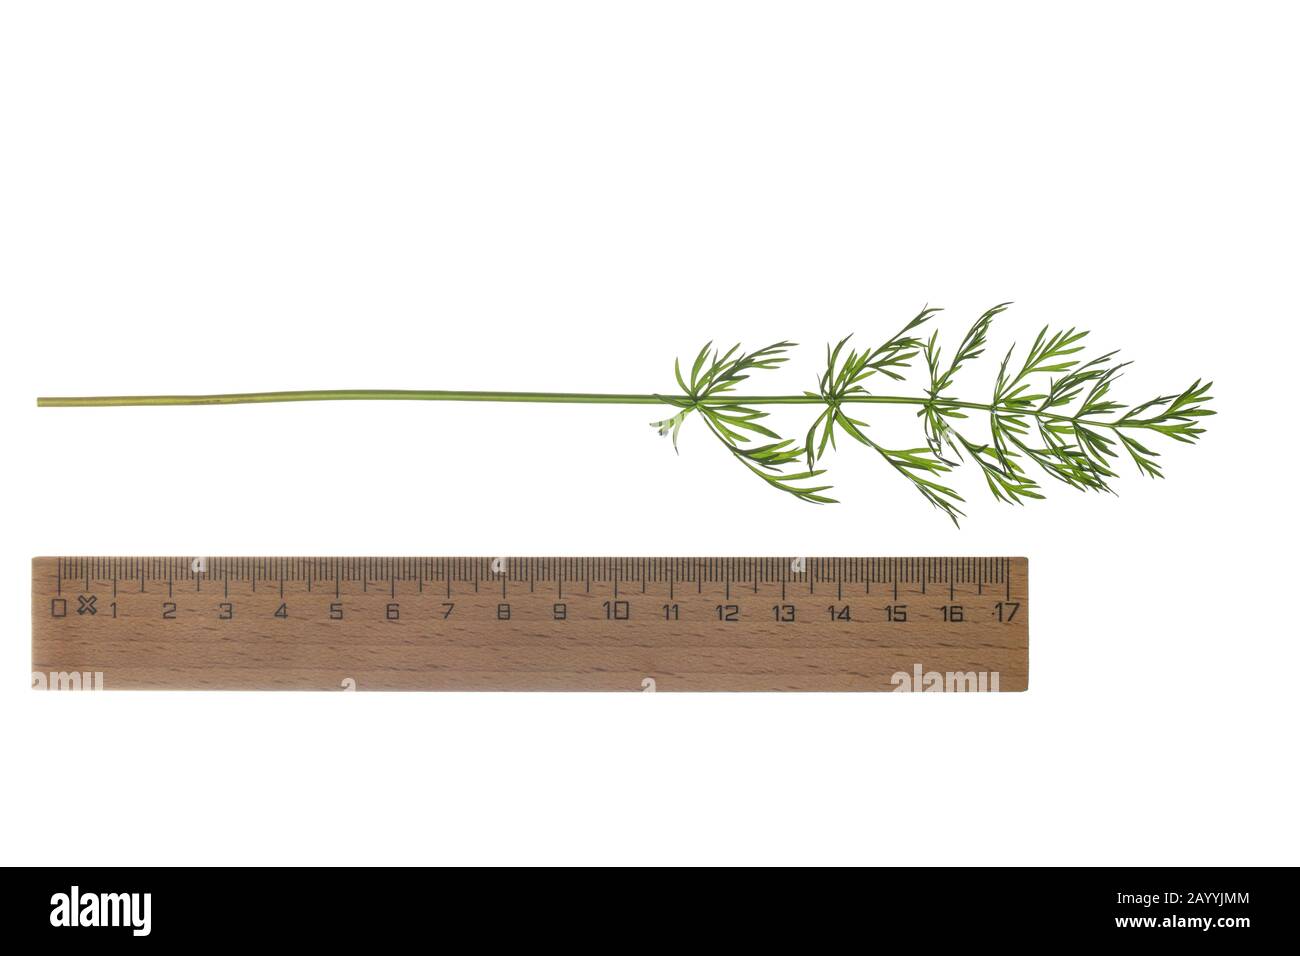 common caraway (Carum carvi), leaf with ruler, cutout, Germany Stock Photo